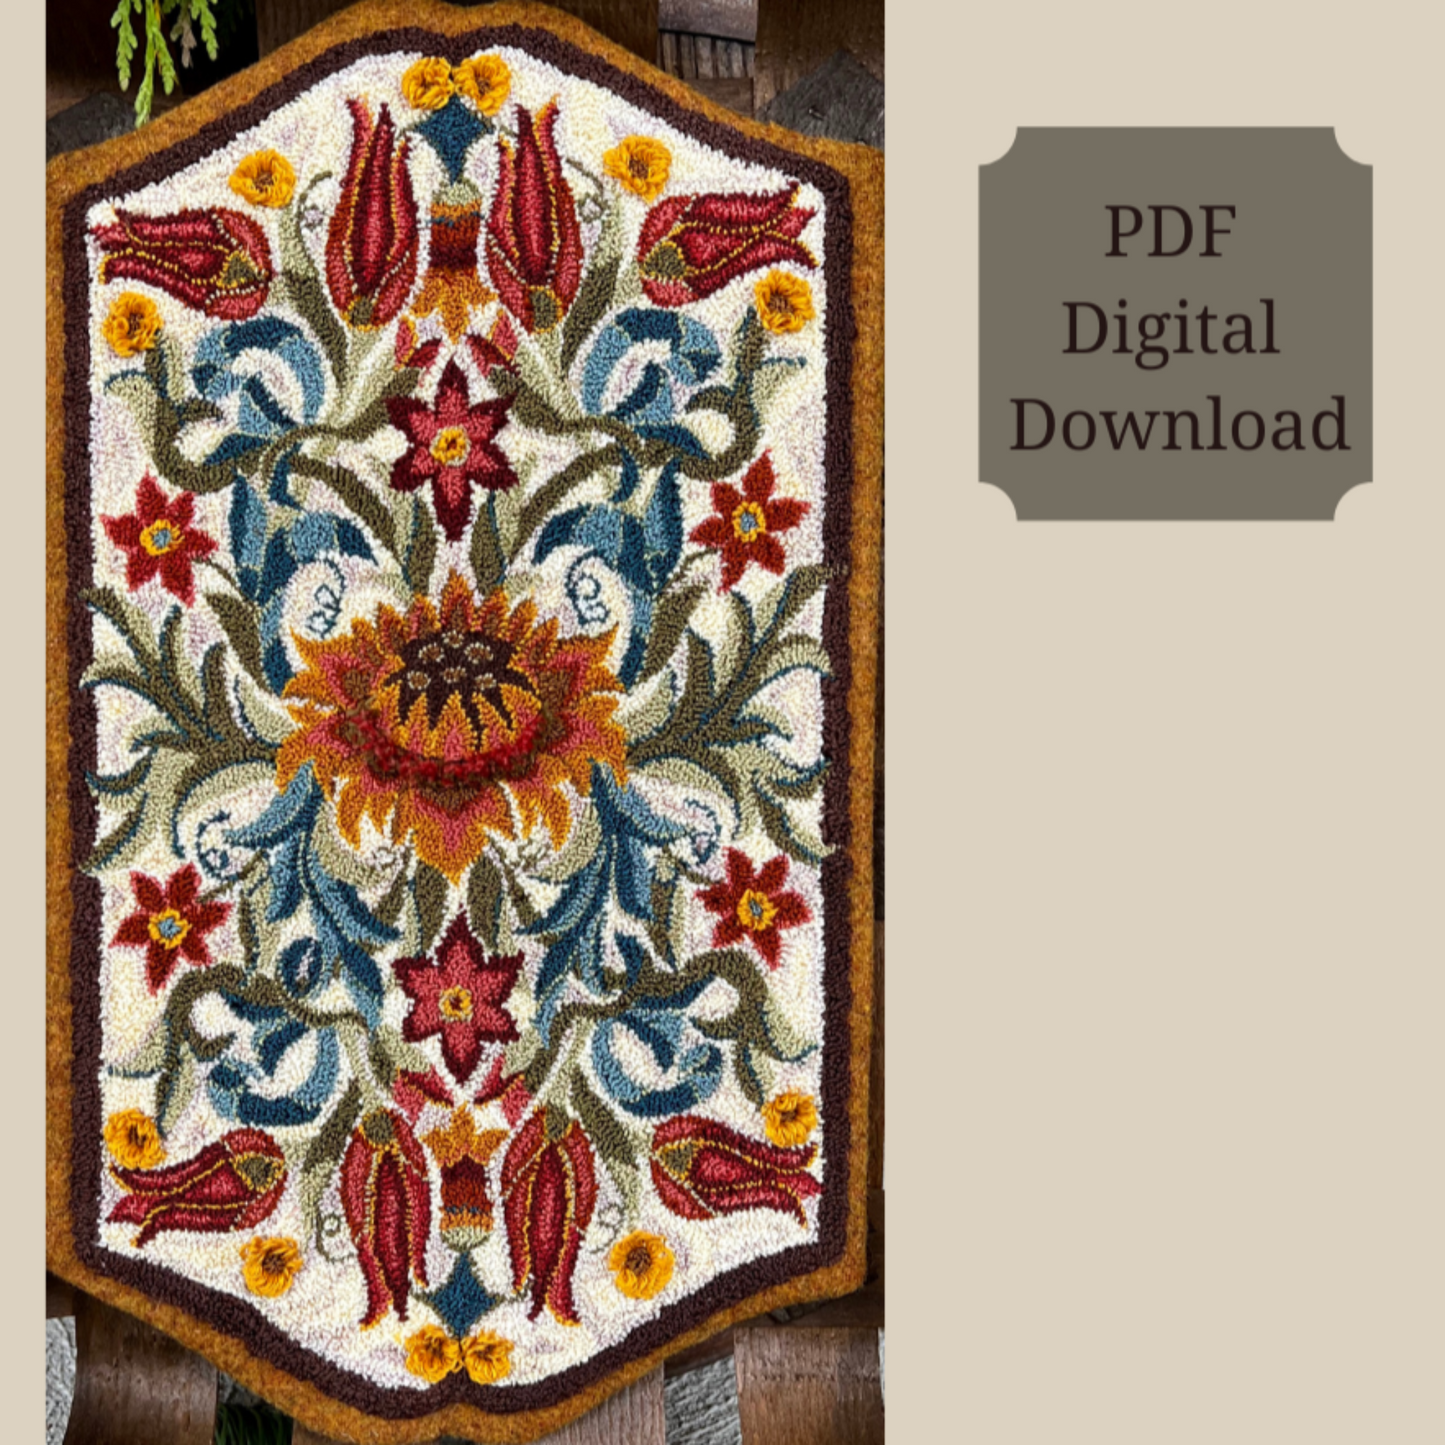 Delight- PDF Rug Hooking or Rug Punch Needle Pattern, by Orphaned Wool. This timeless design has a beautiful scalloped edge design that make for quite an elegant pattern. This is a PDF Paper Pattern digital download that’s pattern is meant to be enlarged to your desired size pattern. This can be easily done at most shipping or copy center stores. Copyright 2022- Kelly Kanyok / Orphaned Wool